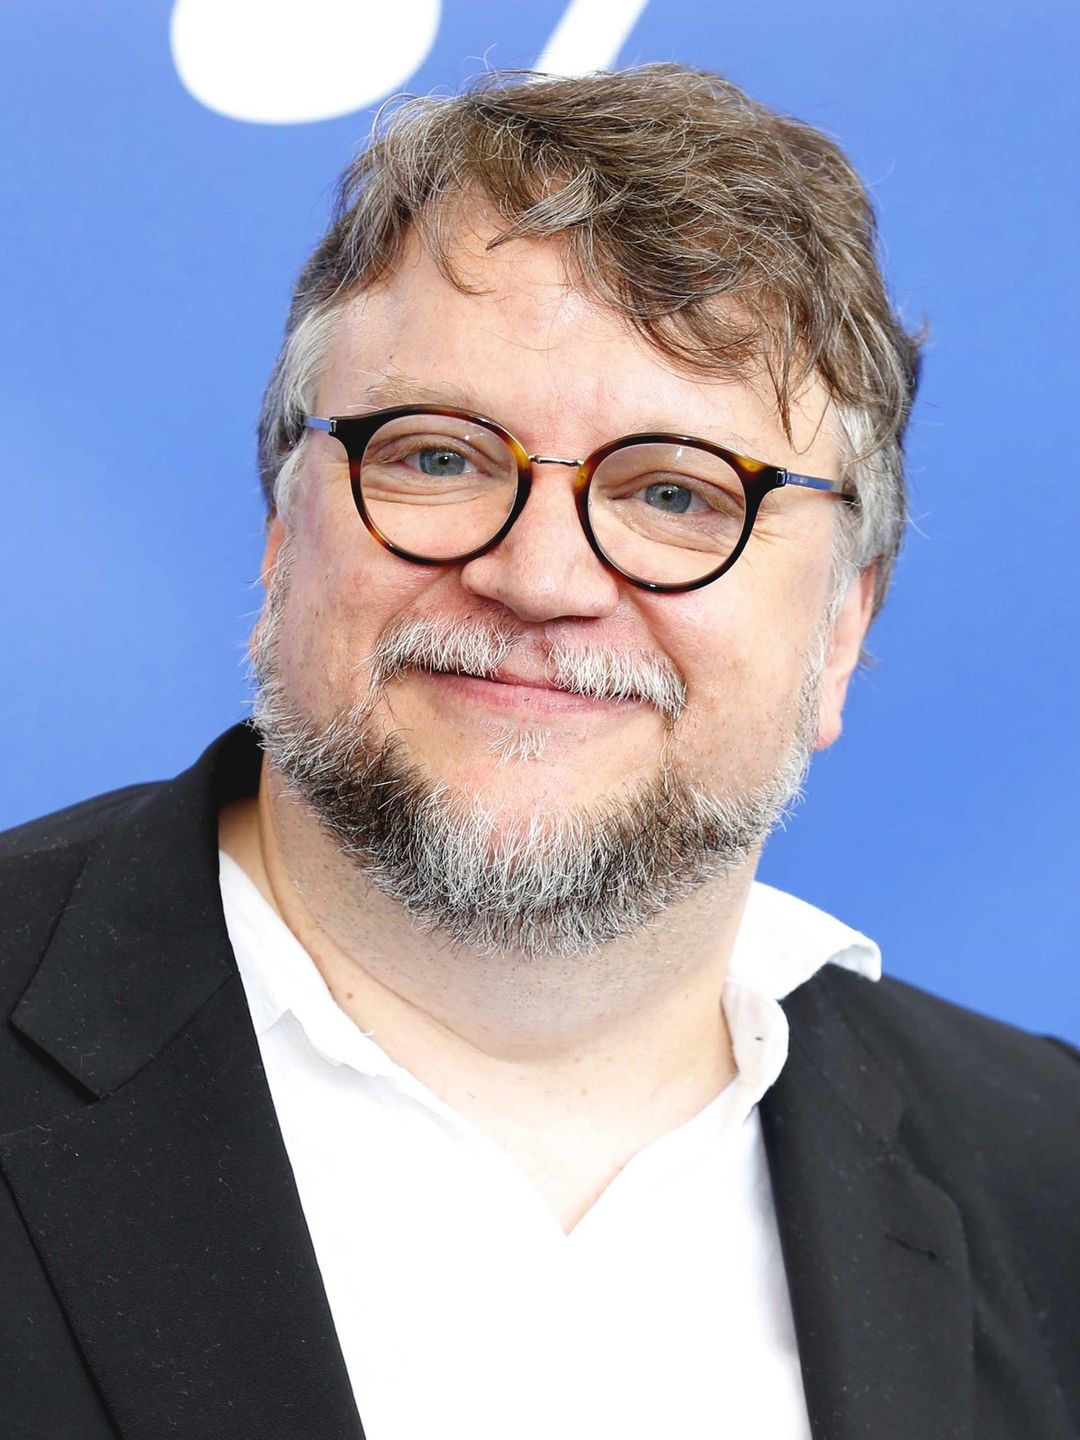 Guillermo del Toro early childhood